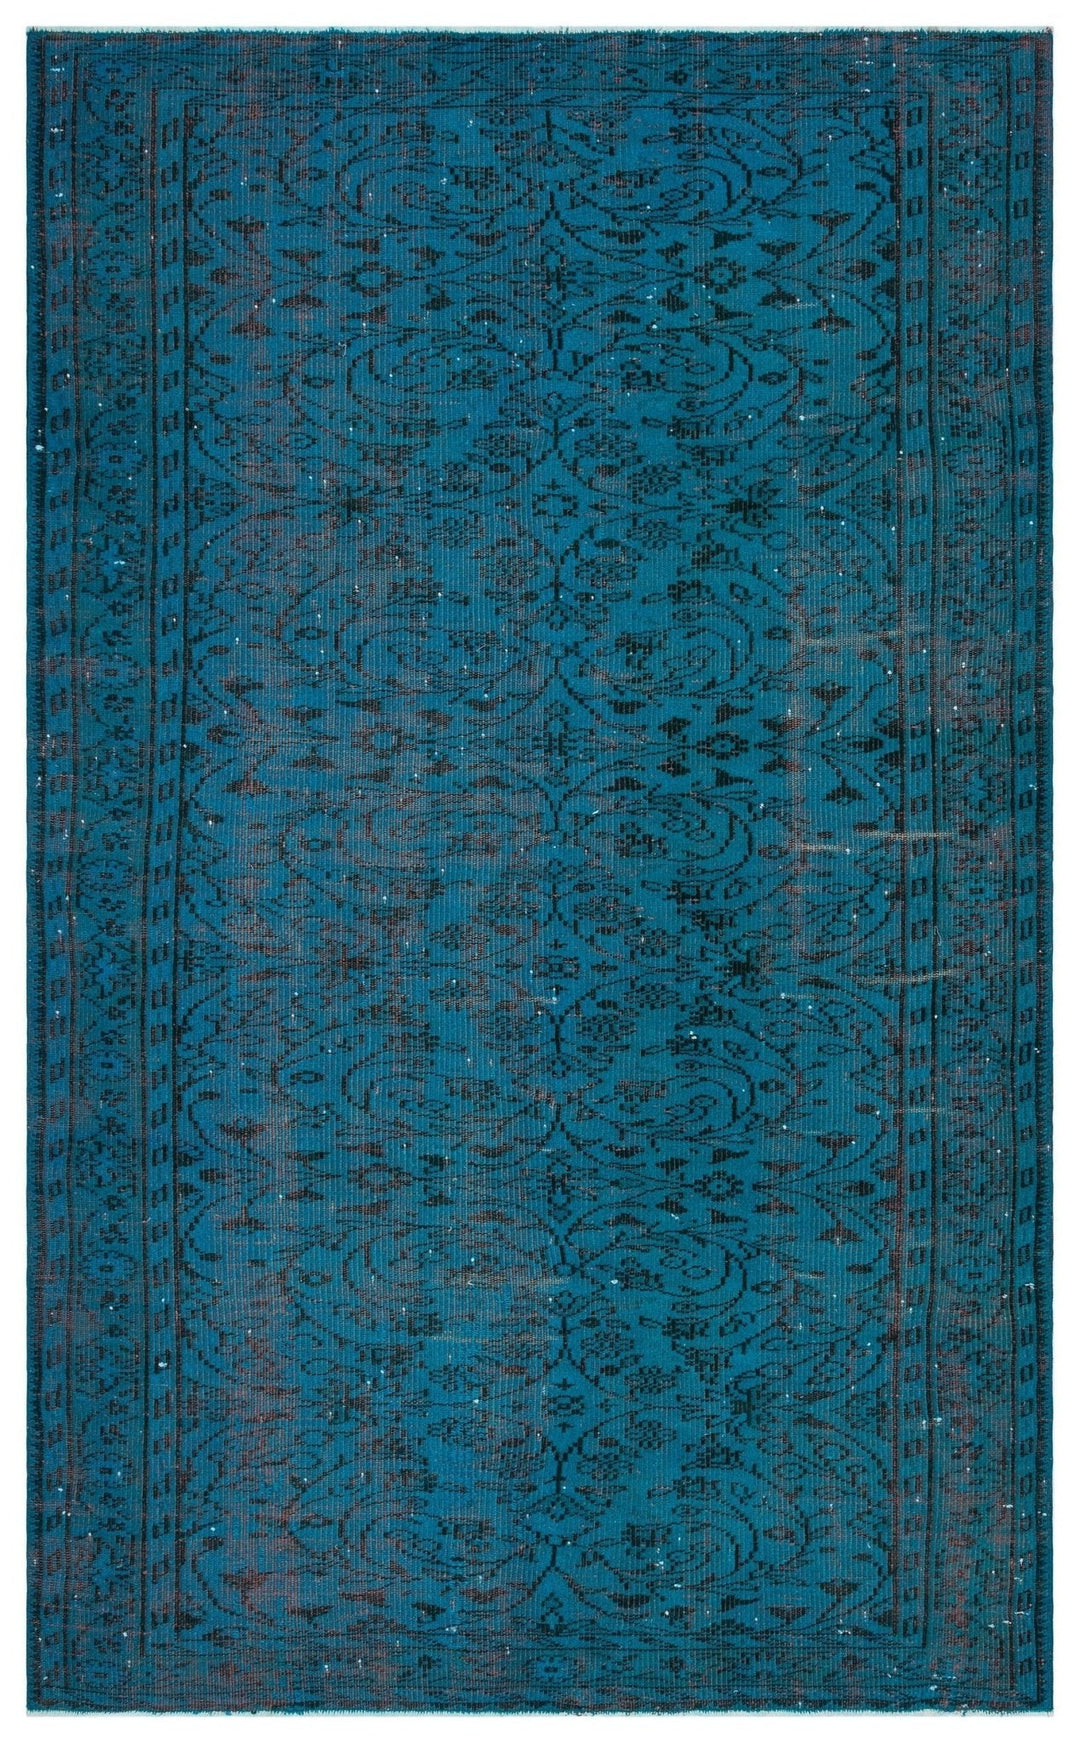 Athens 29695 Turquoise Tumbled Wool Hand Woven Rug 171 x 272